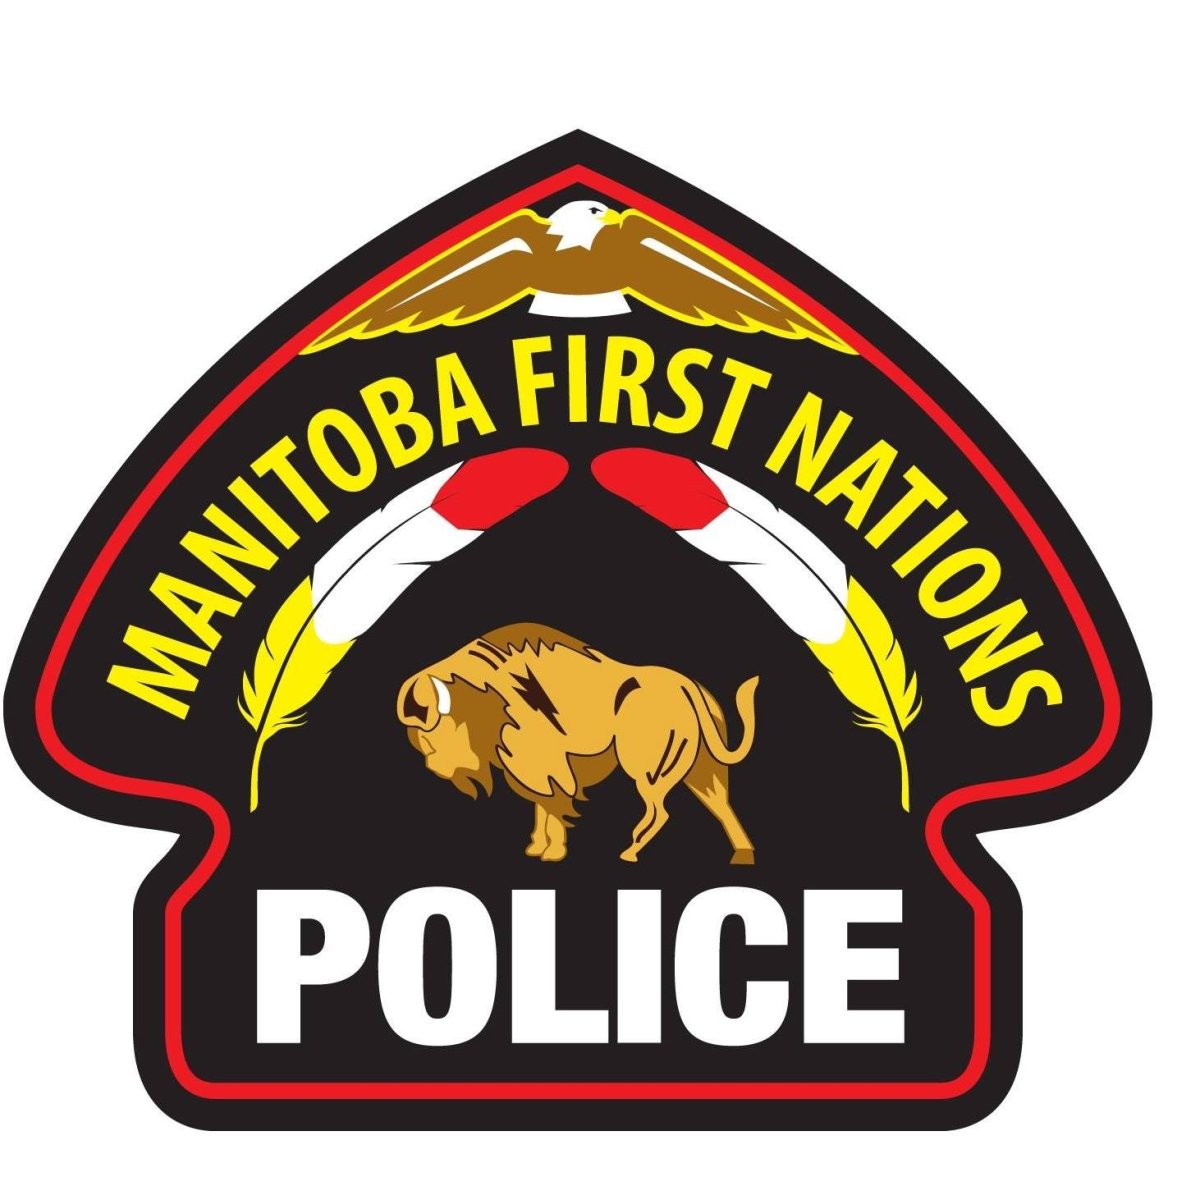 Logo for the Manitoba First Nations police